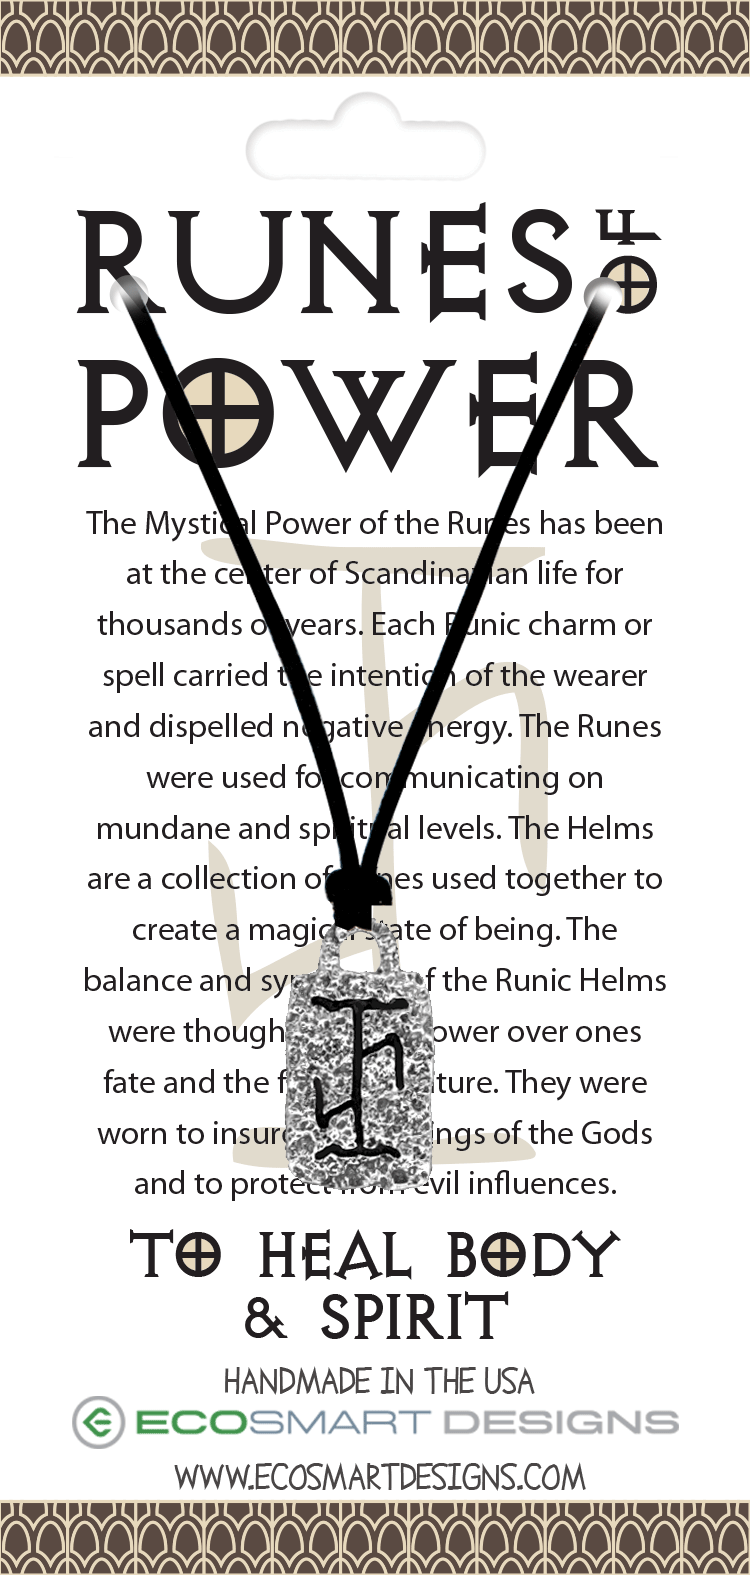 Runes of Power - To Heal Body & Spirit charm on necklace